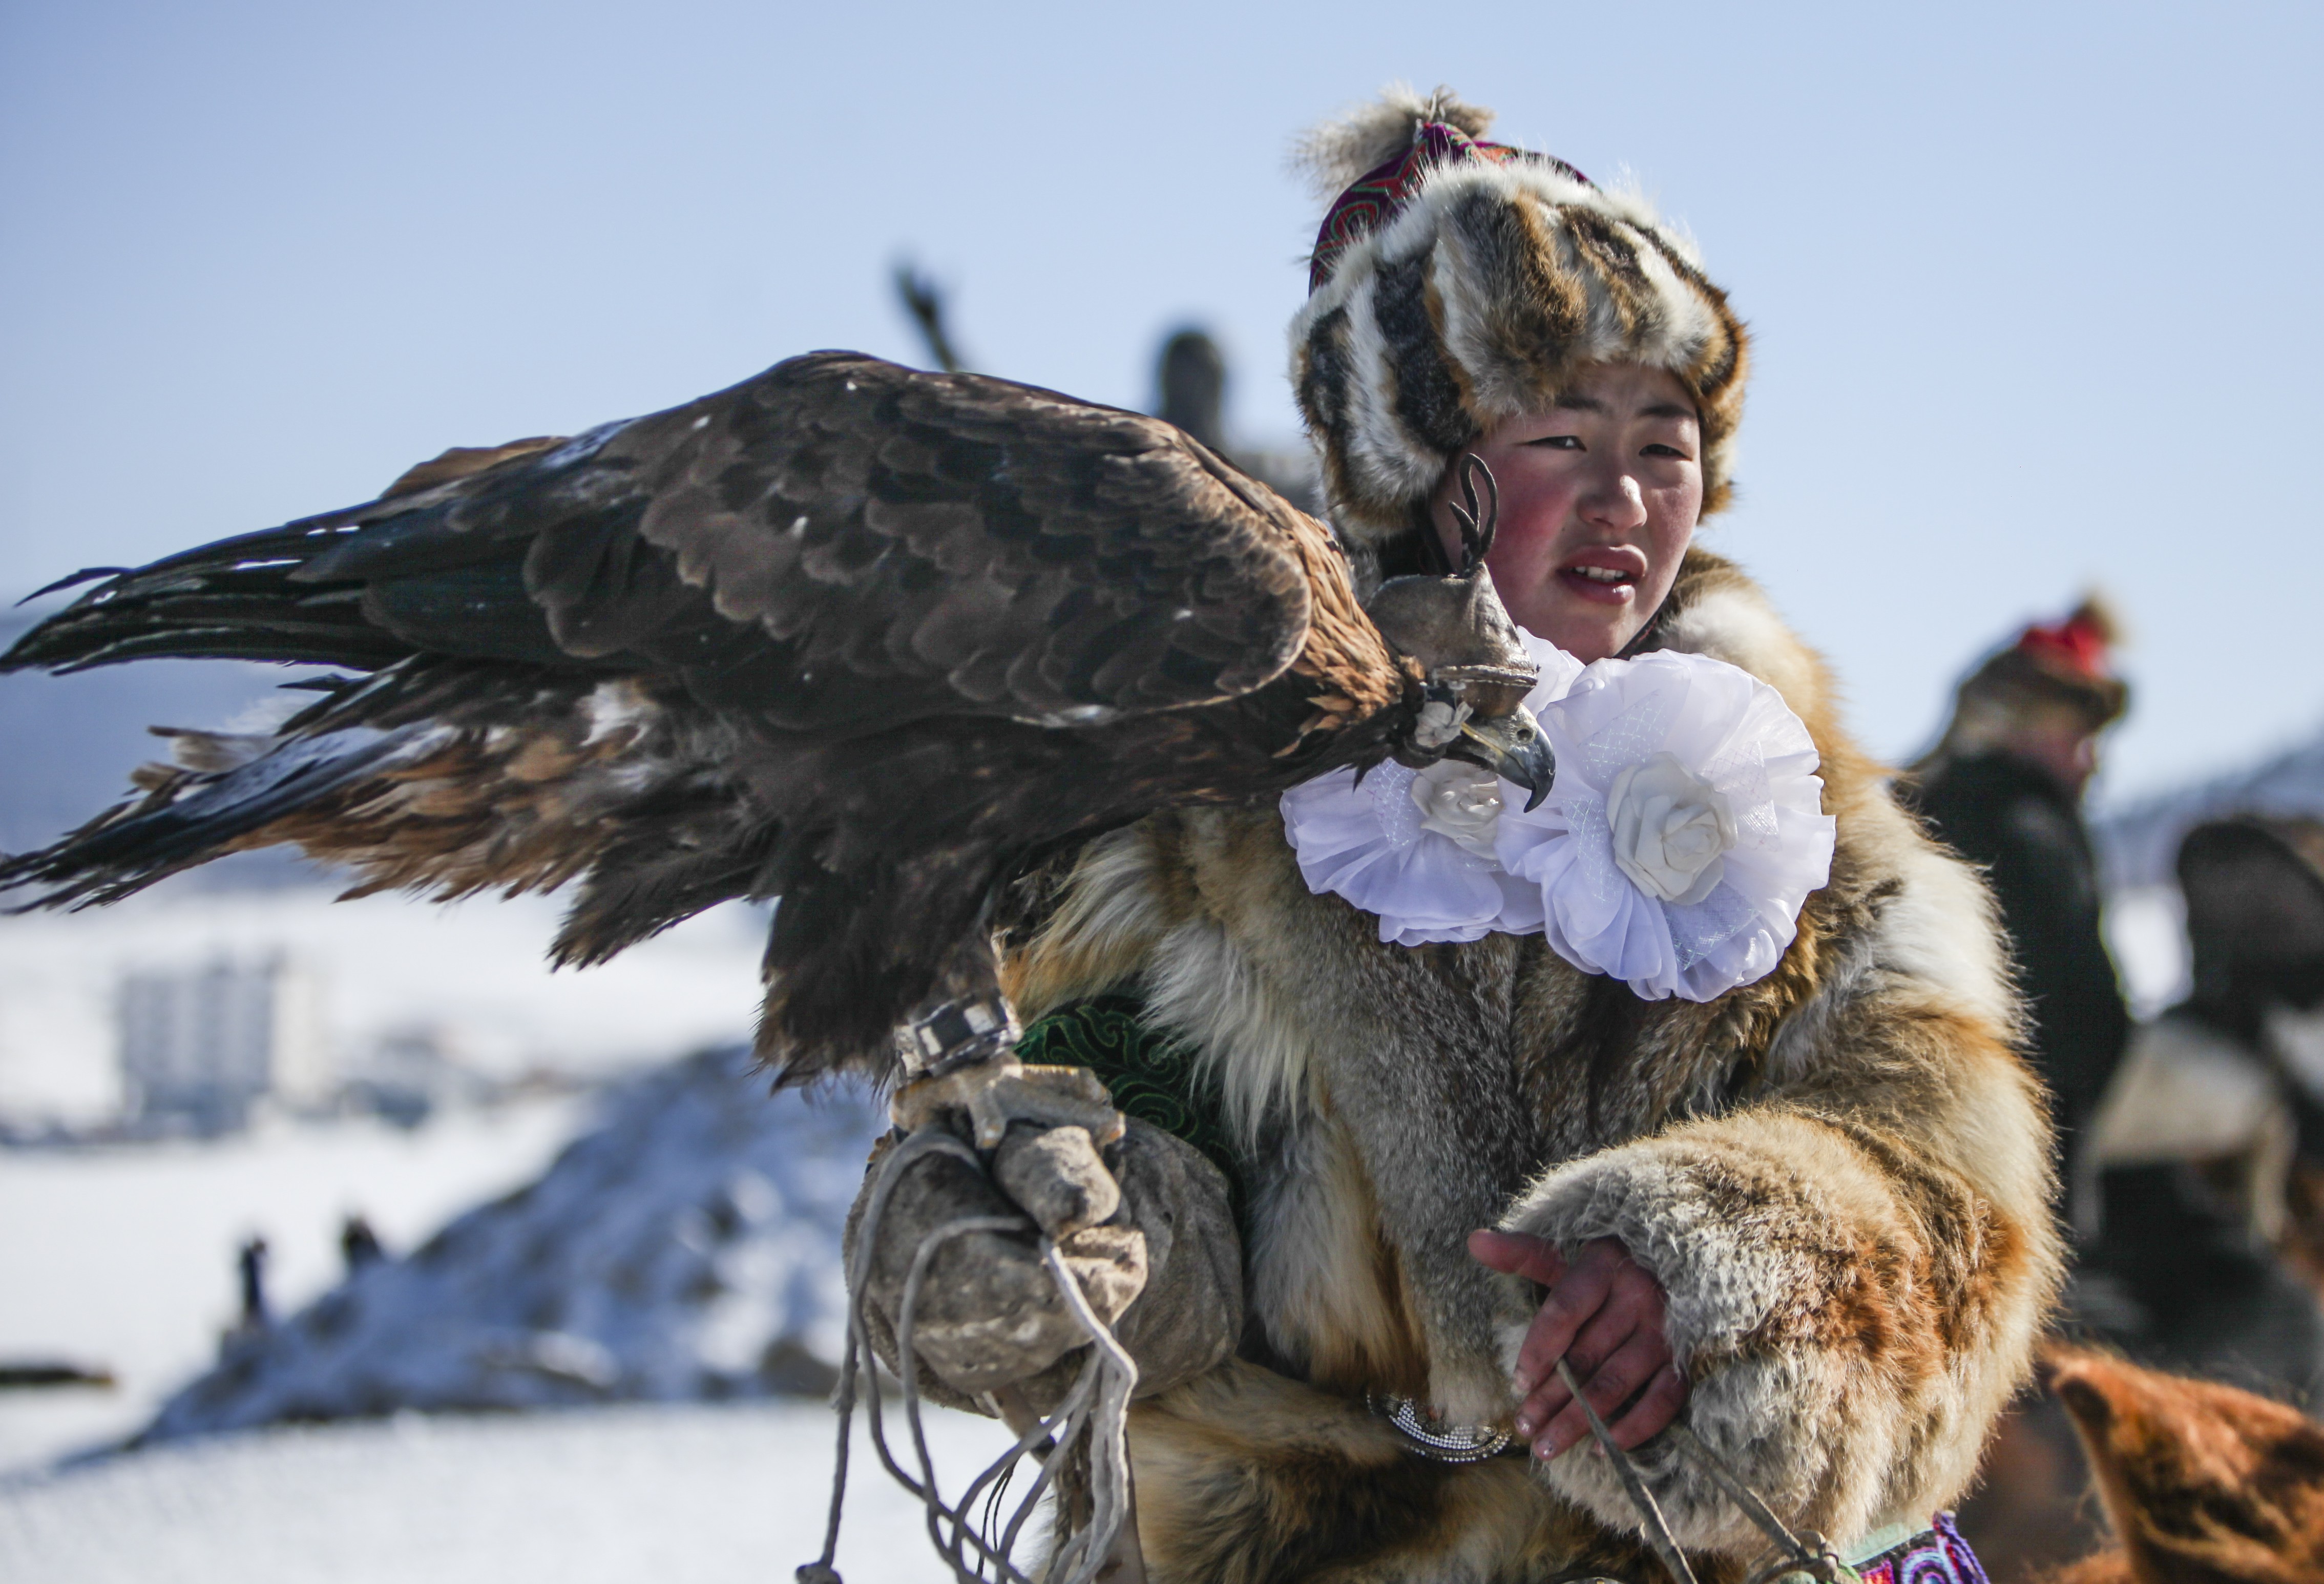 The 6,000-year-old tradition of eagle hunting among Mongolia’s Kazakh minority had almost died out 20 years ago. The launch of festivals gave it a new lease of life, and a recent film about the sport raised its international profile